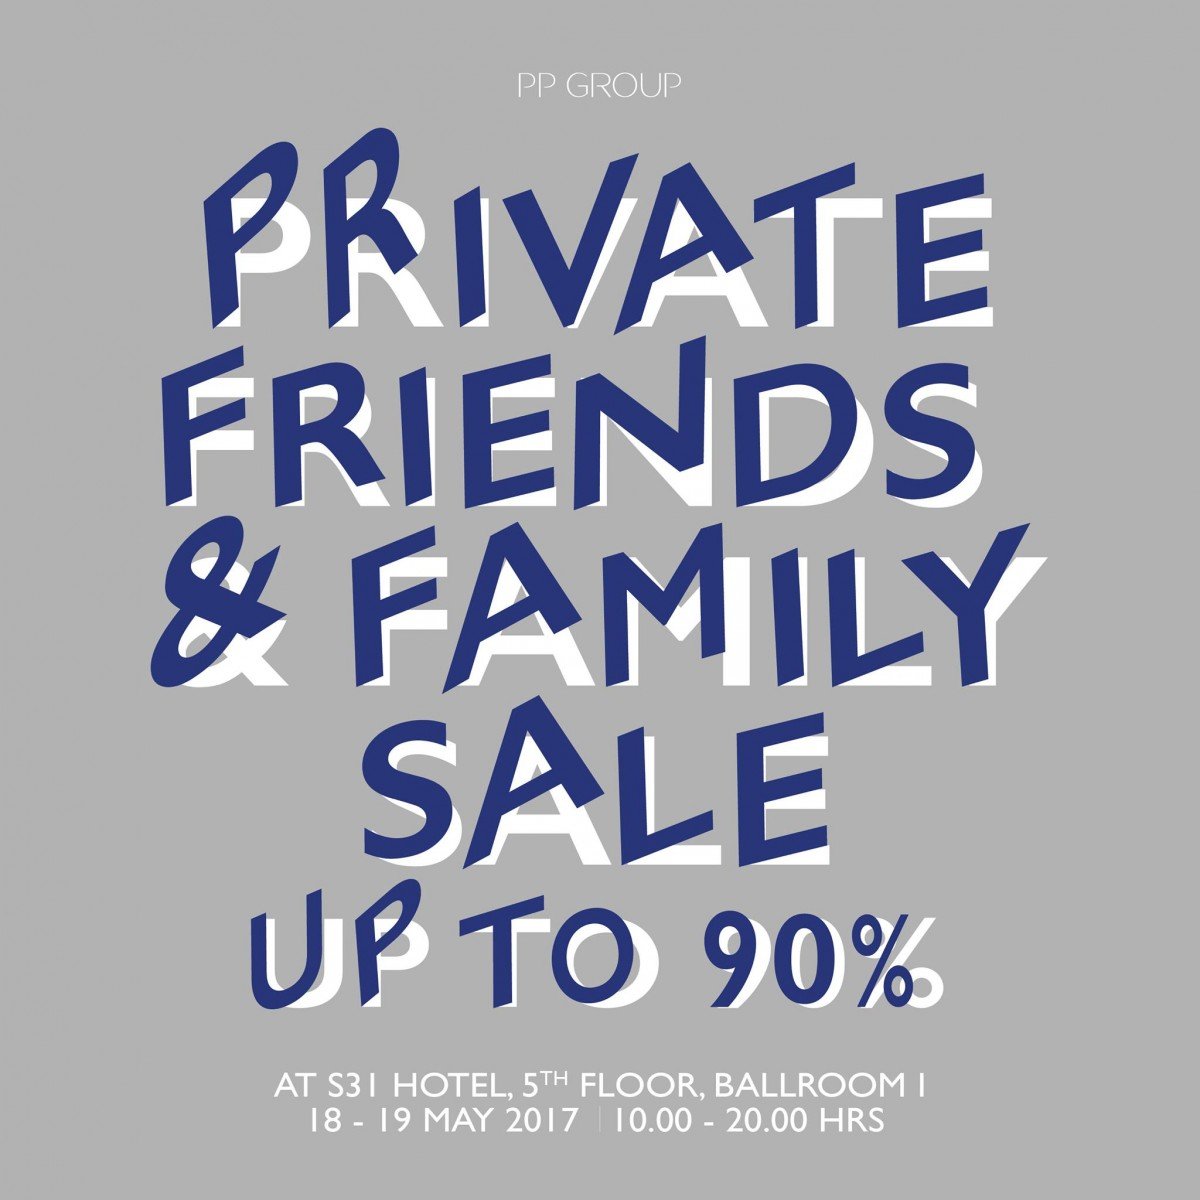 PP GROUP PRIVATE FRIENDS & FAMILY SALE